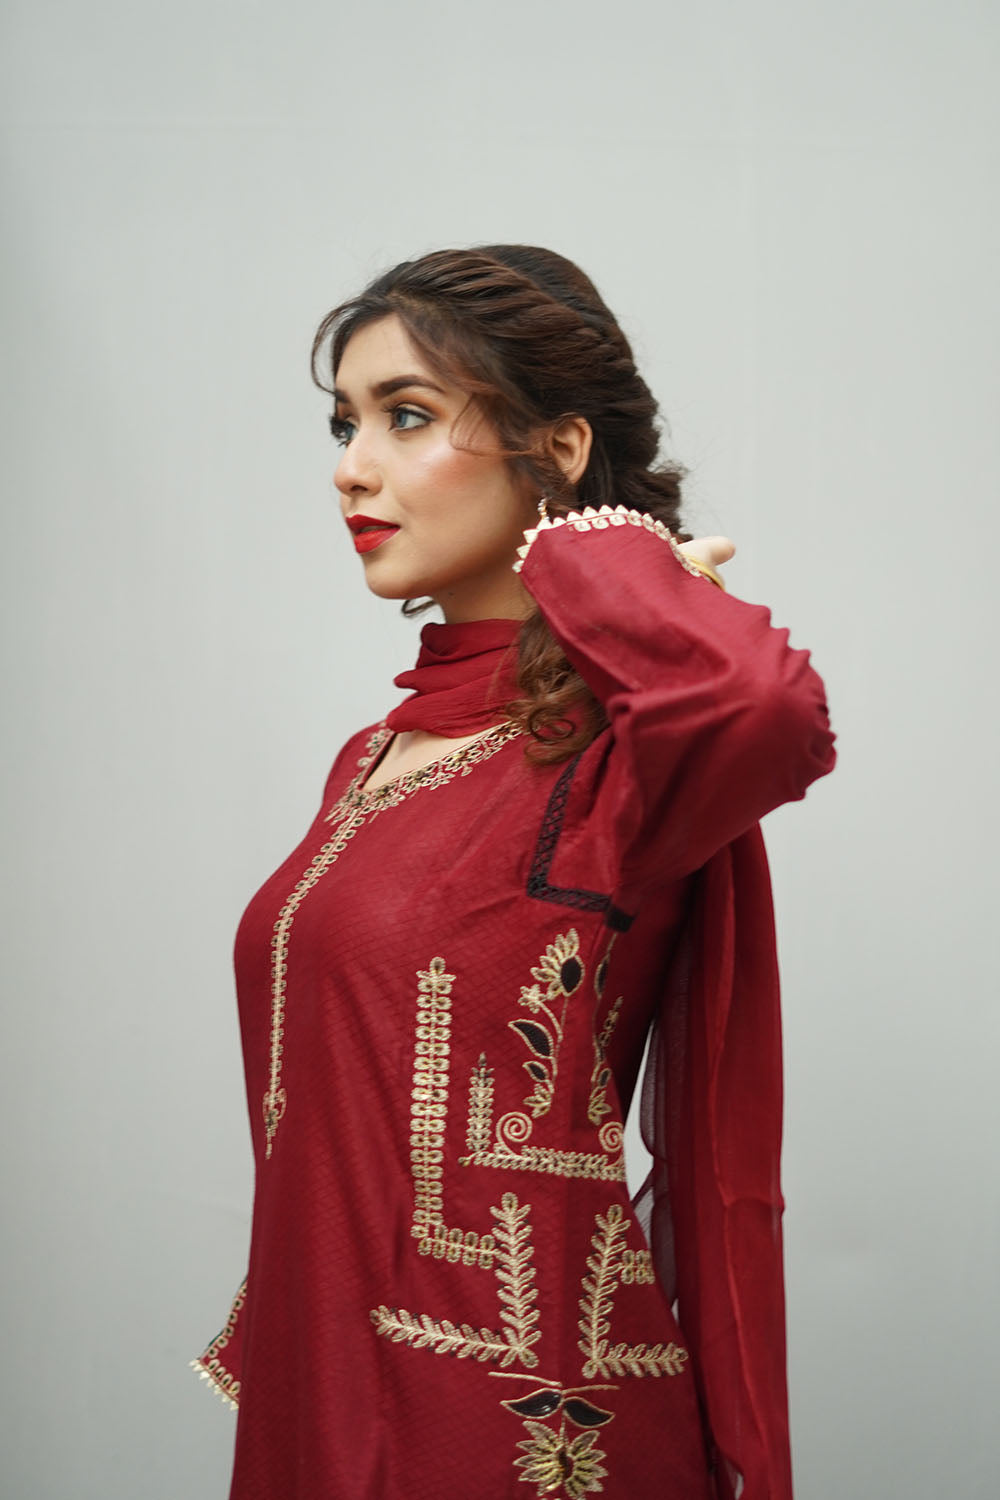 BEST SELLING - 3 PC  EMBROIDERED SUIT